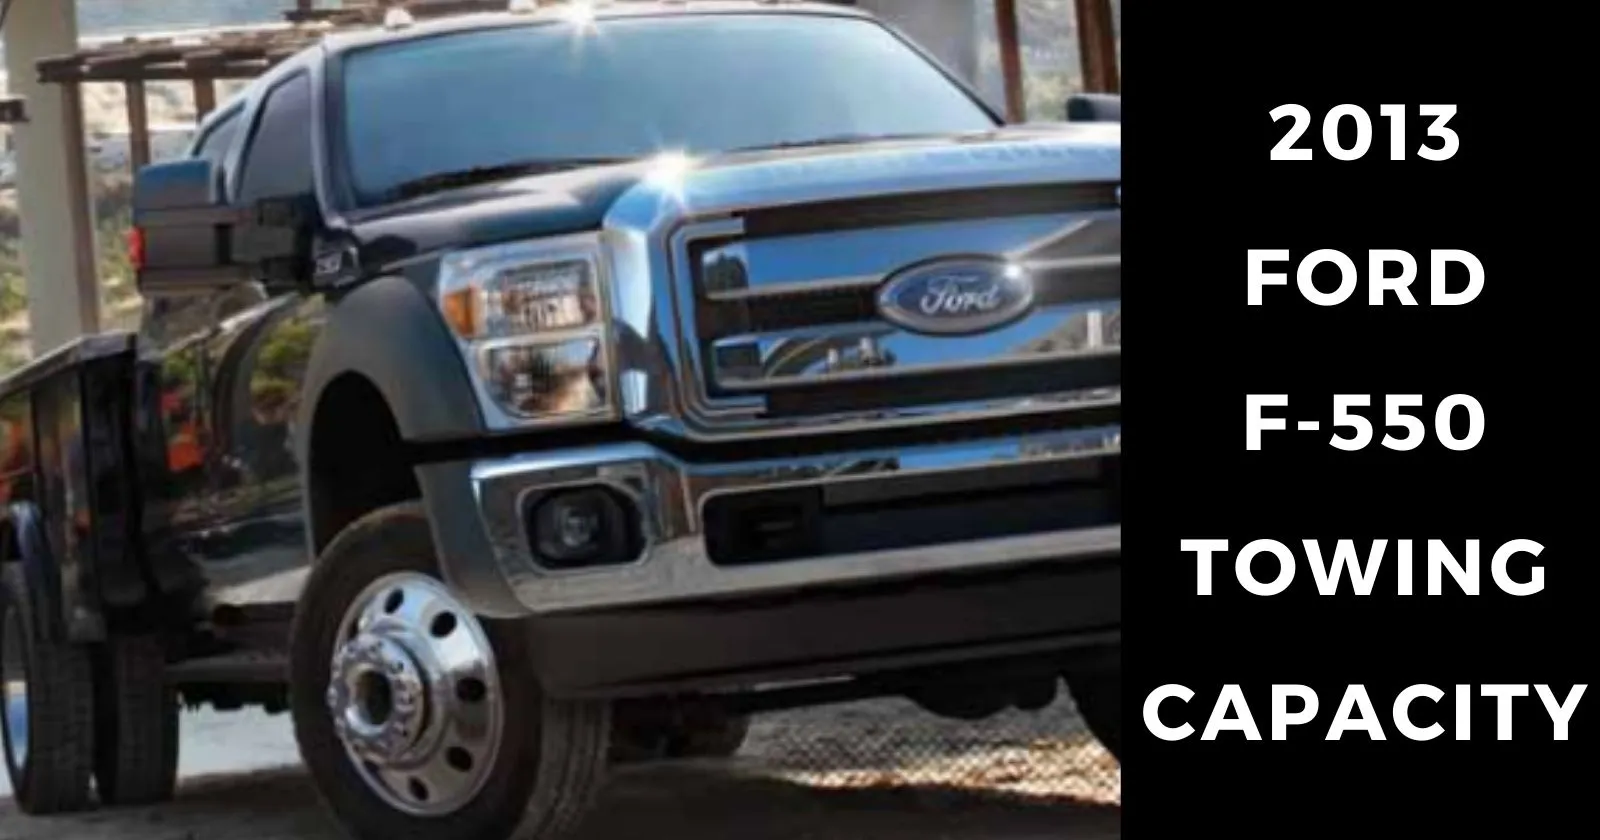 2013-ford-f550-towing-capacity-with-charts-thecartowing